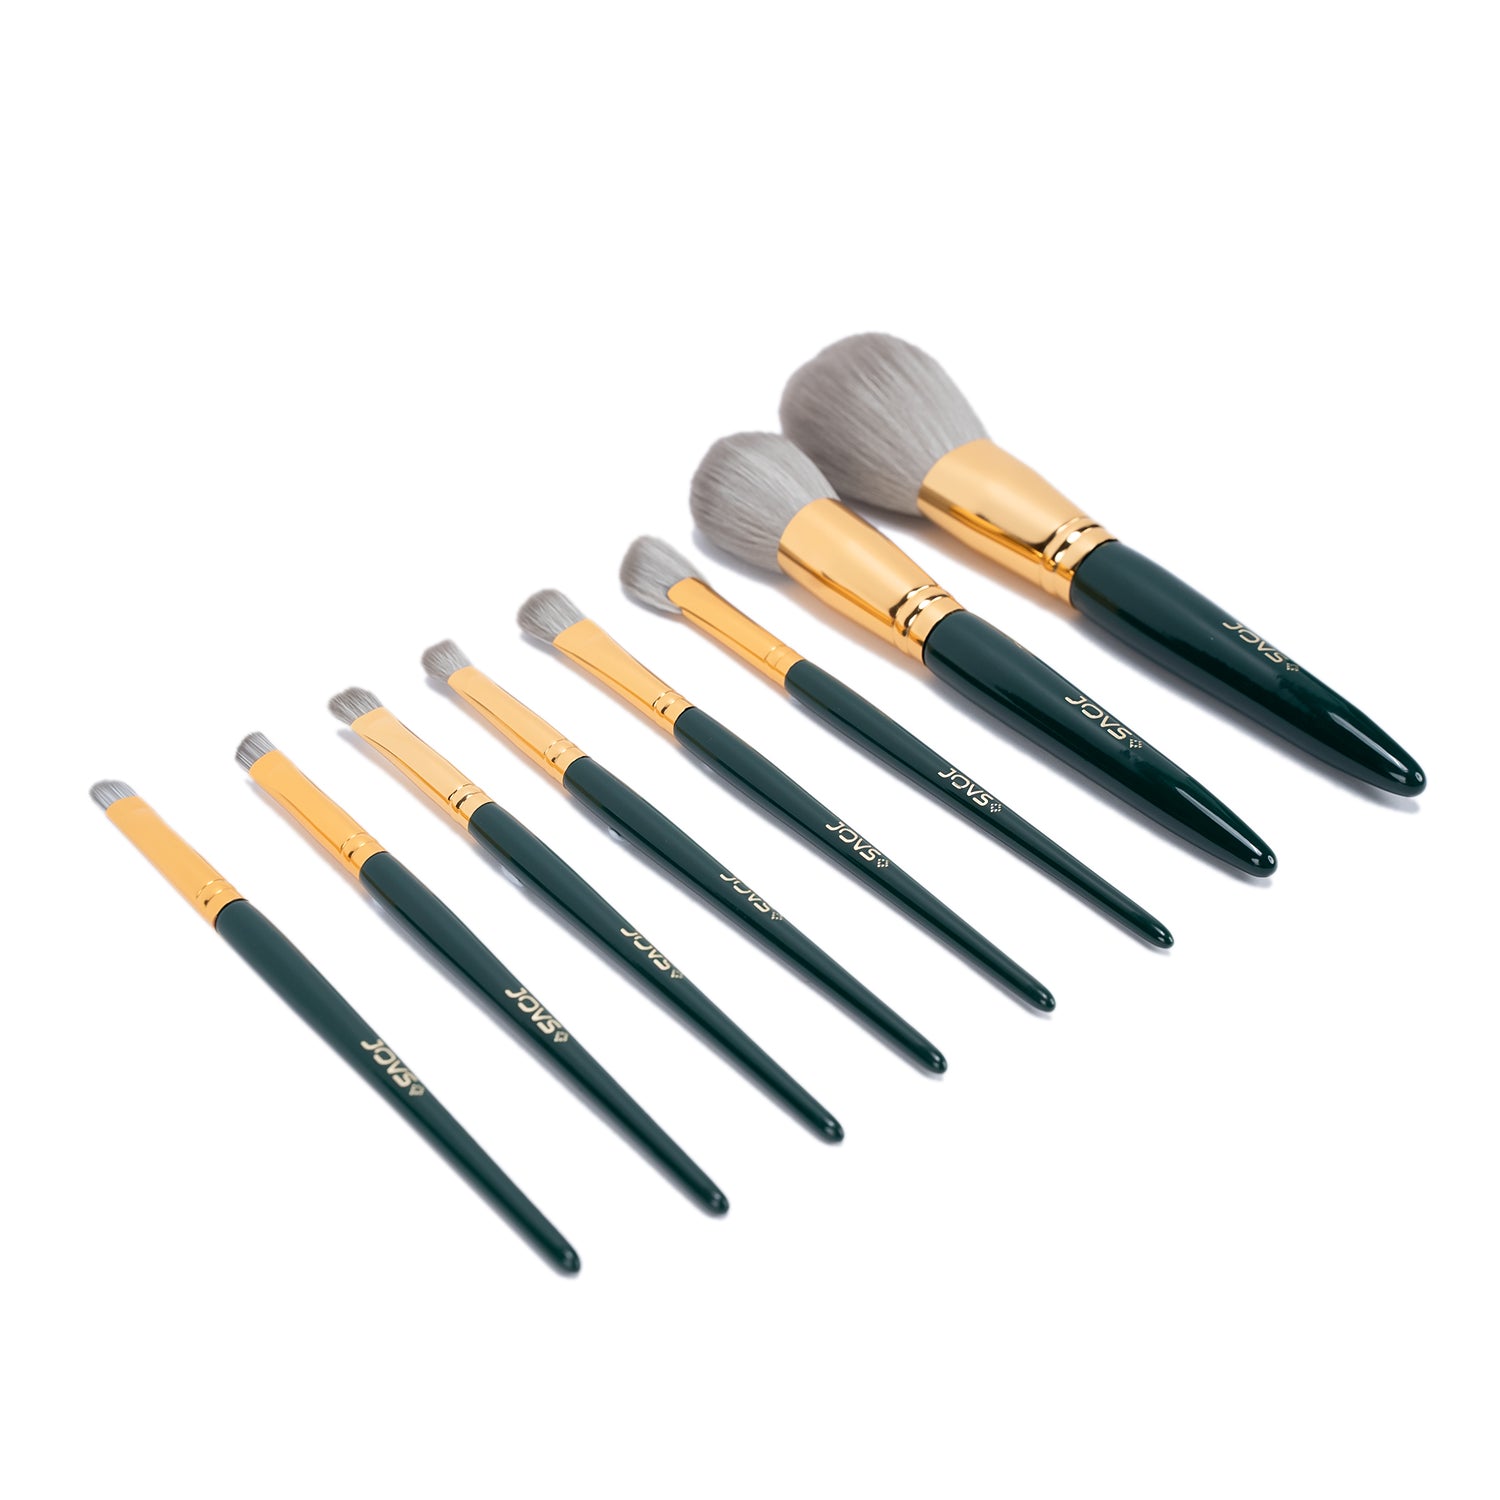 JOVS 8-Piece Customized Cosmetic Brushes Set with Gold Accents.